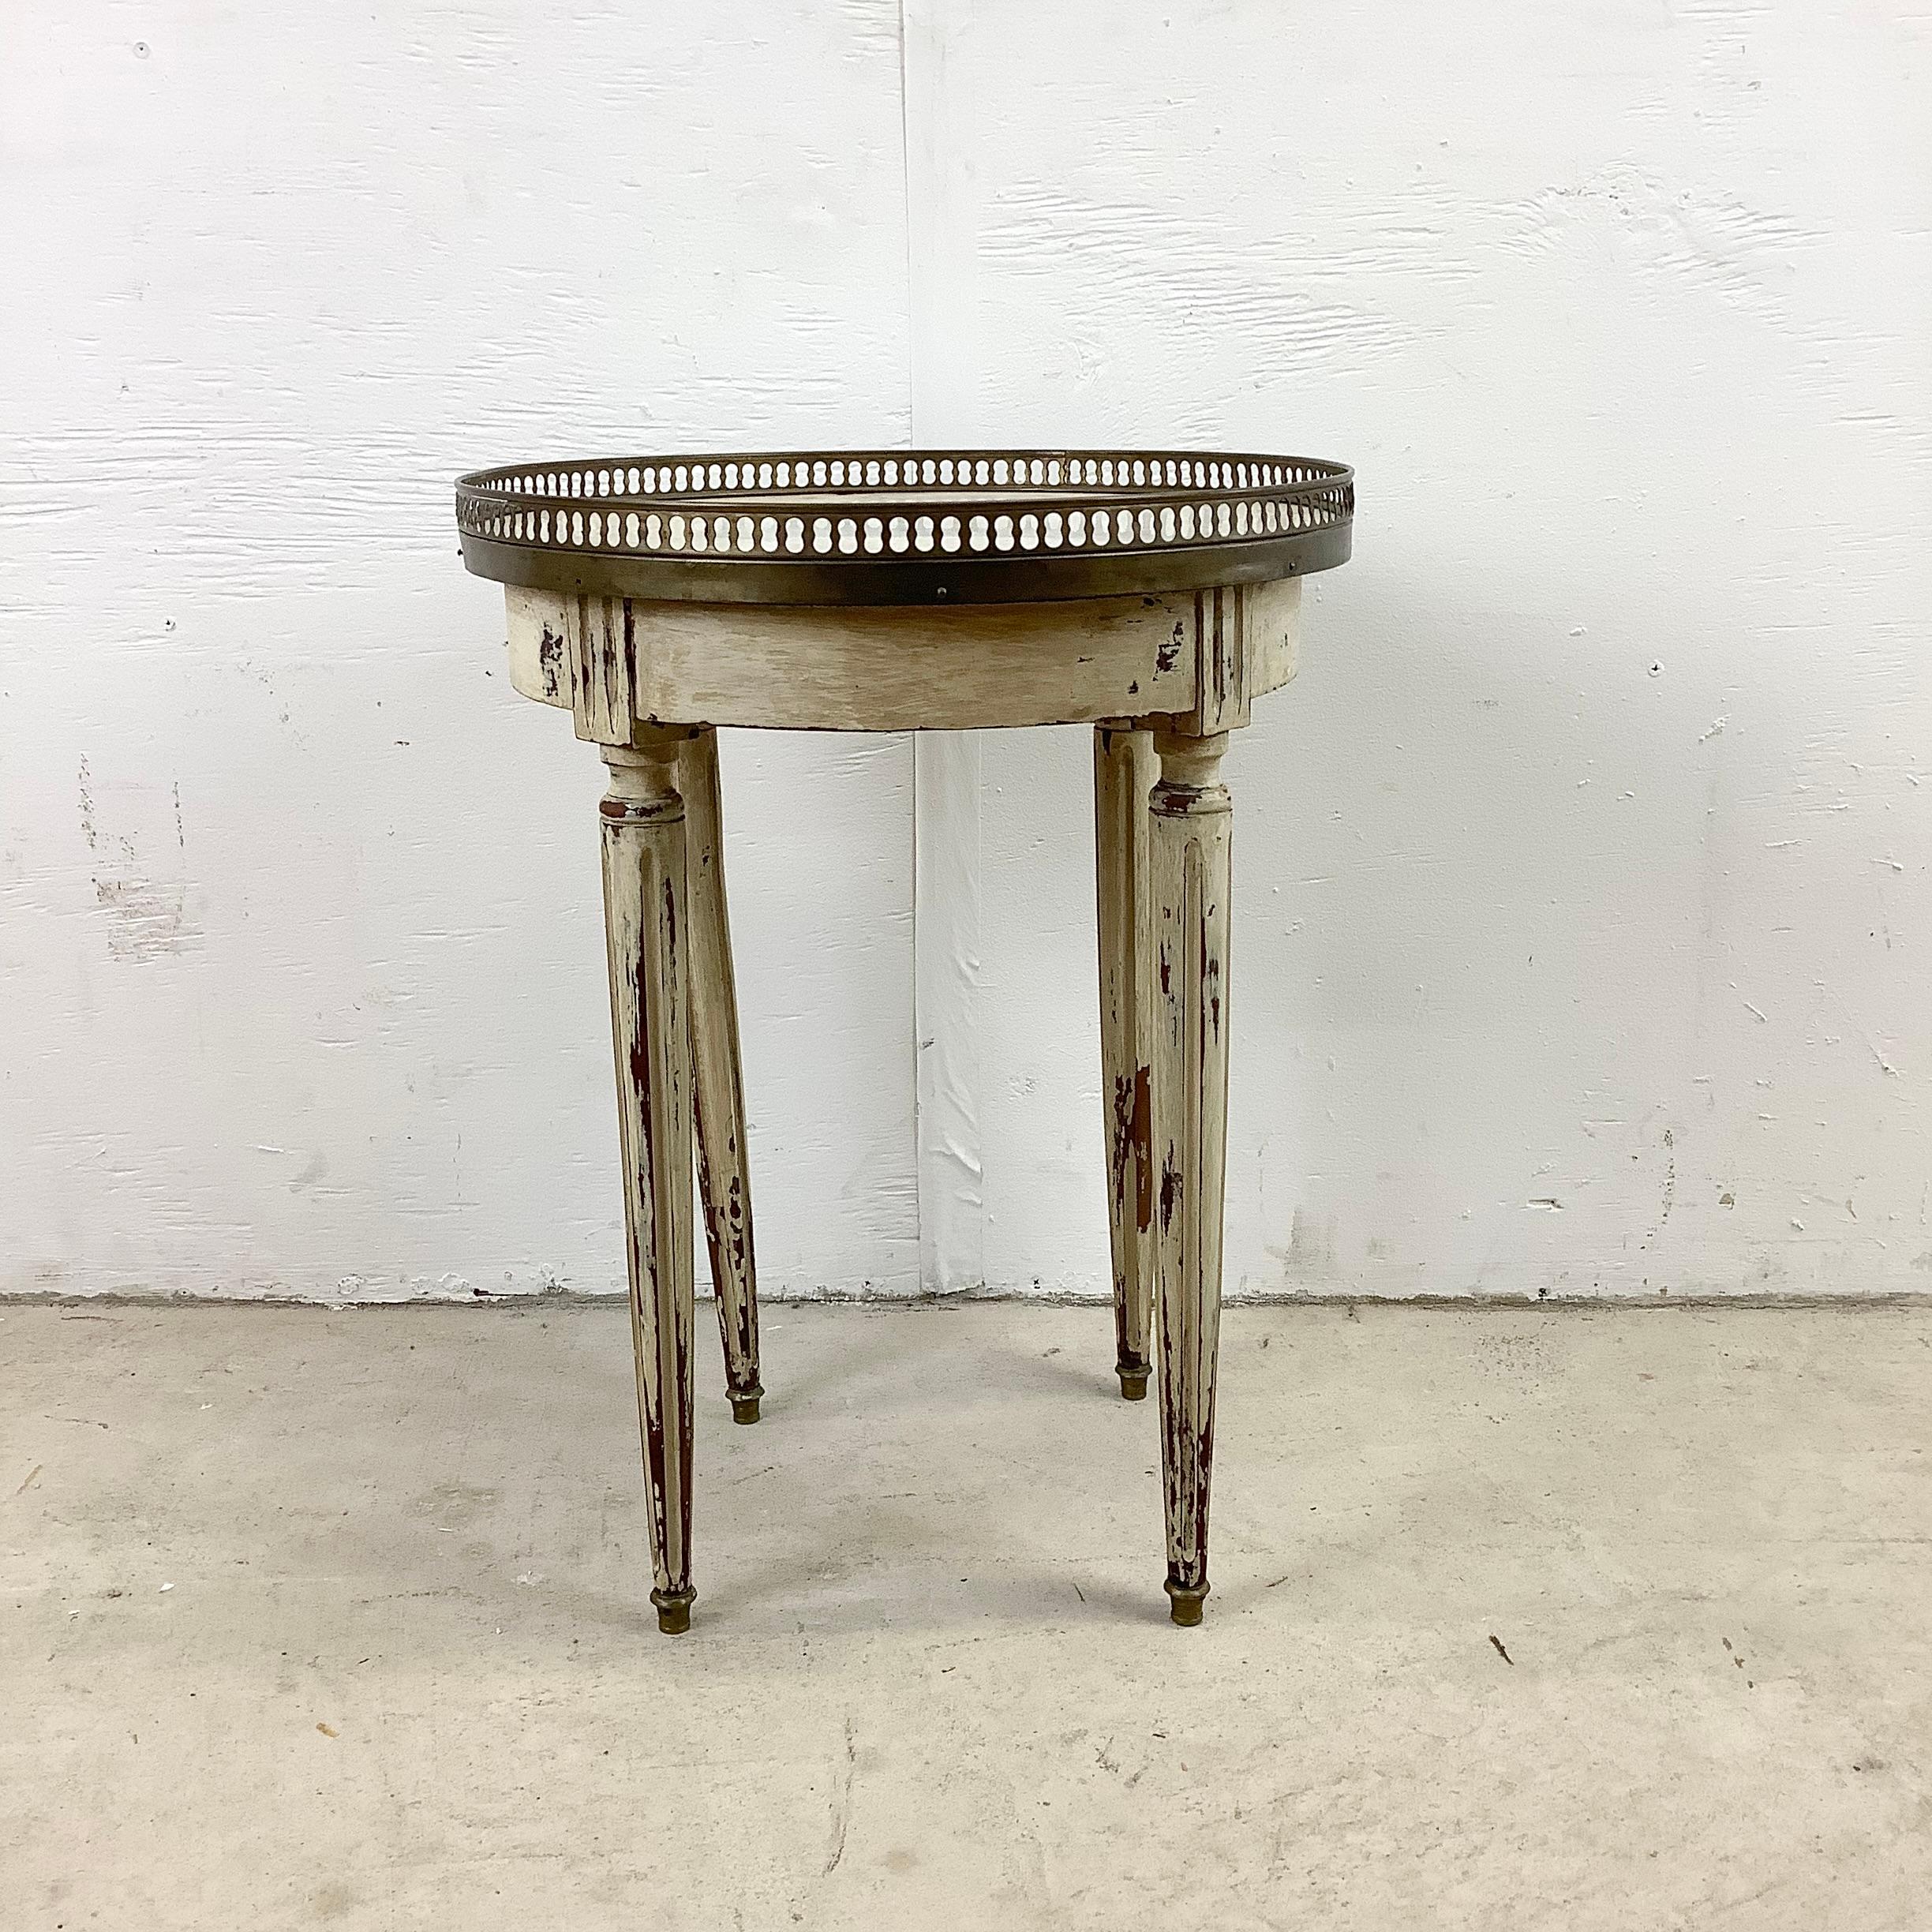 This vintage pedestal side table features ornate turned legs and metal trim detail that add to the french country appeal. An excellent accent table for use as a sofa side table, lamp table, or pedestal display table for any interior. 

Dimensions: